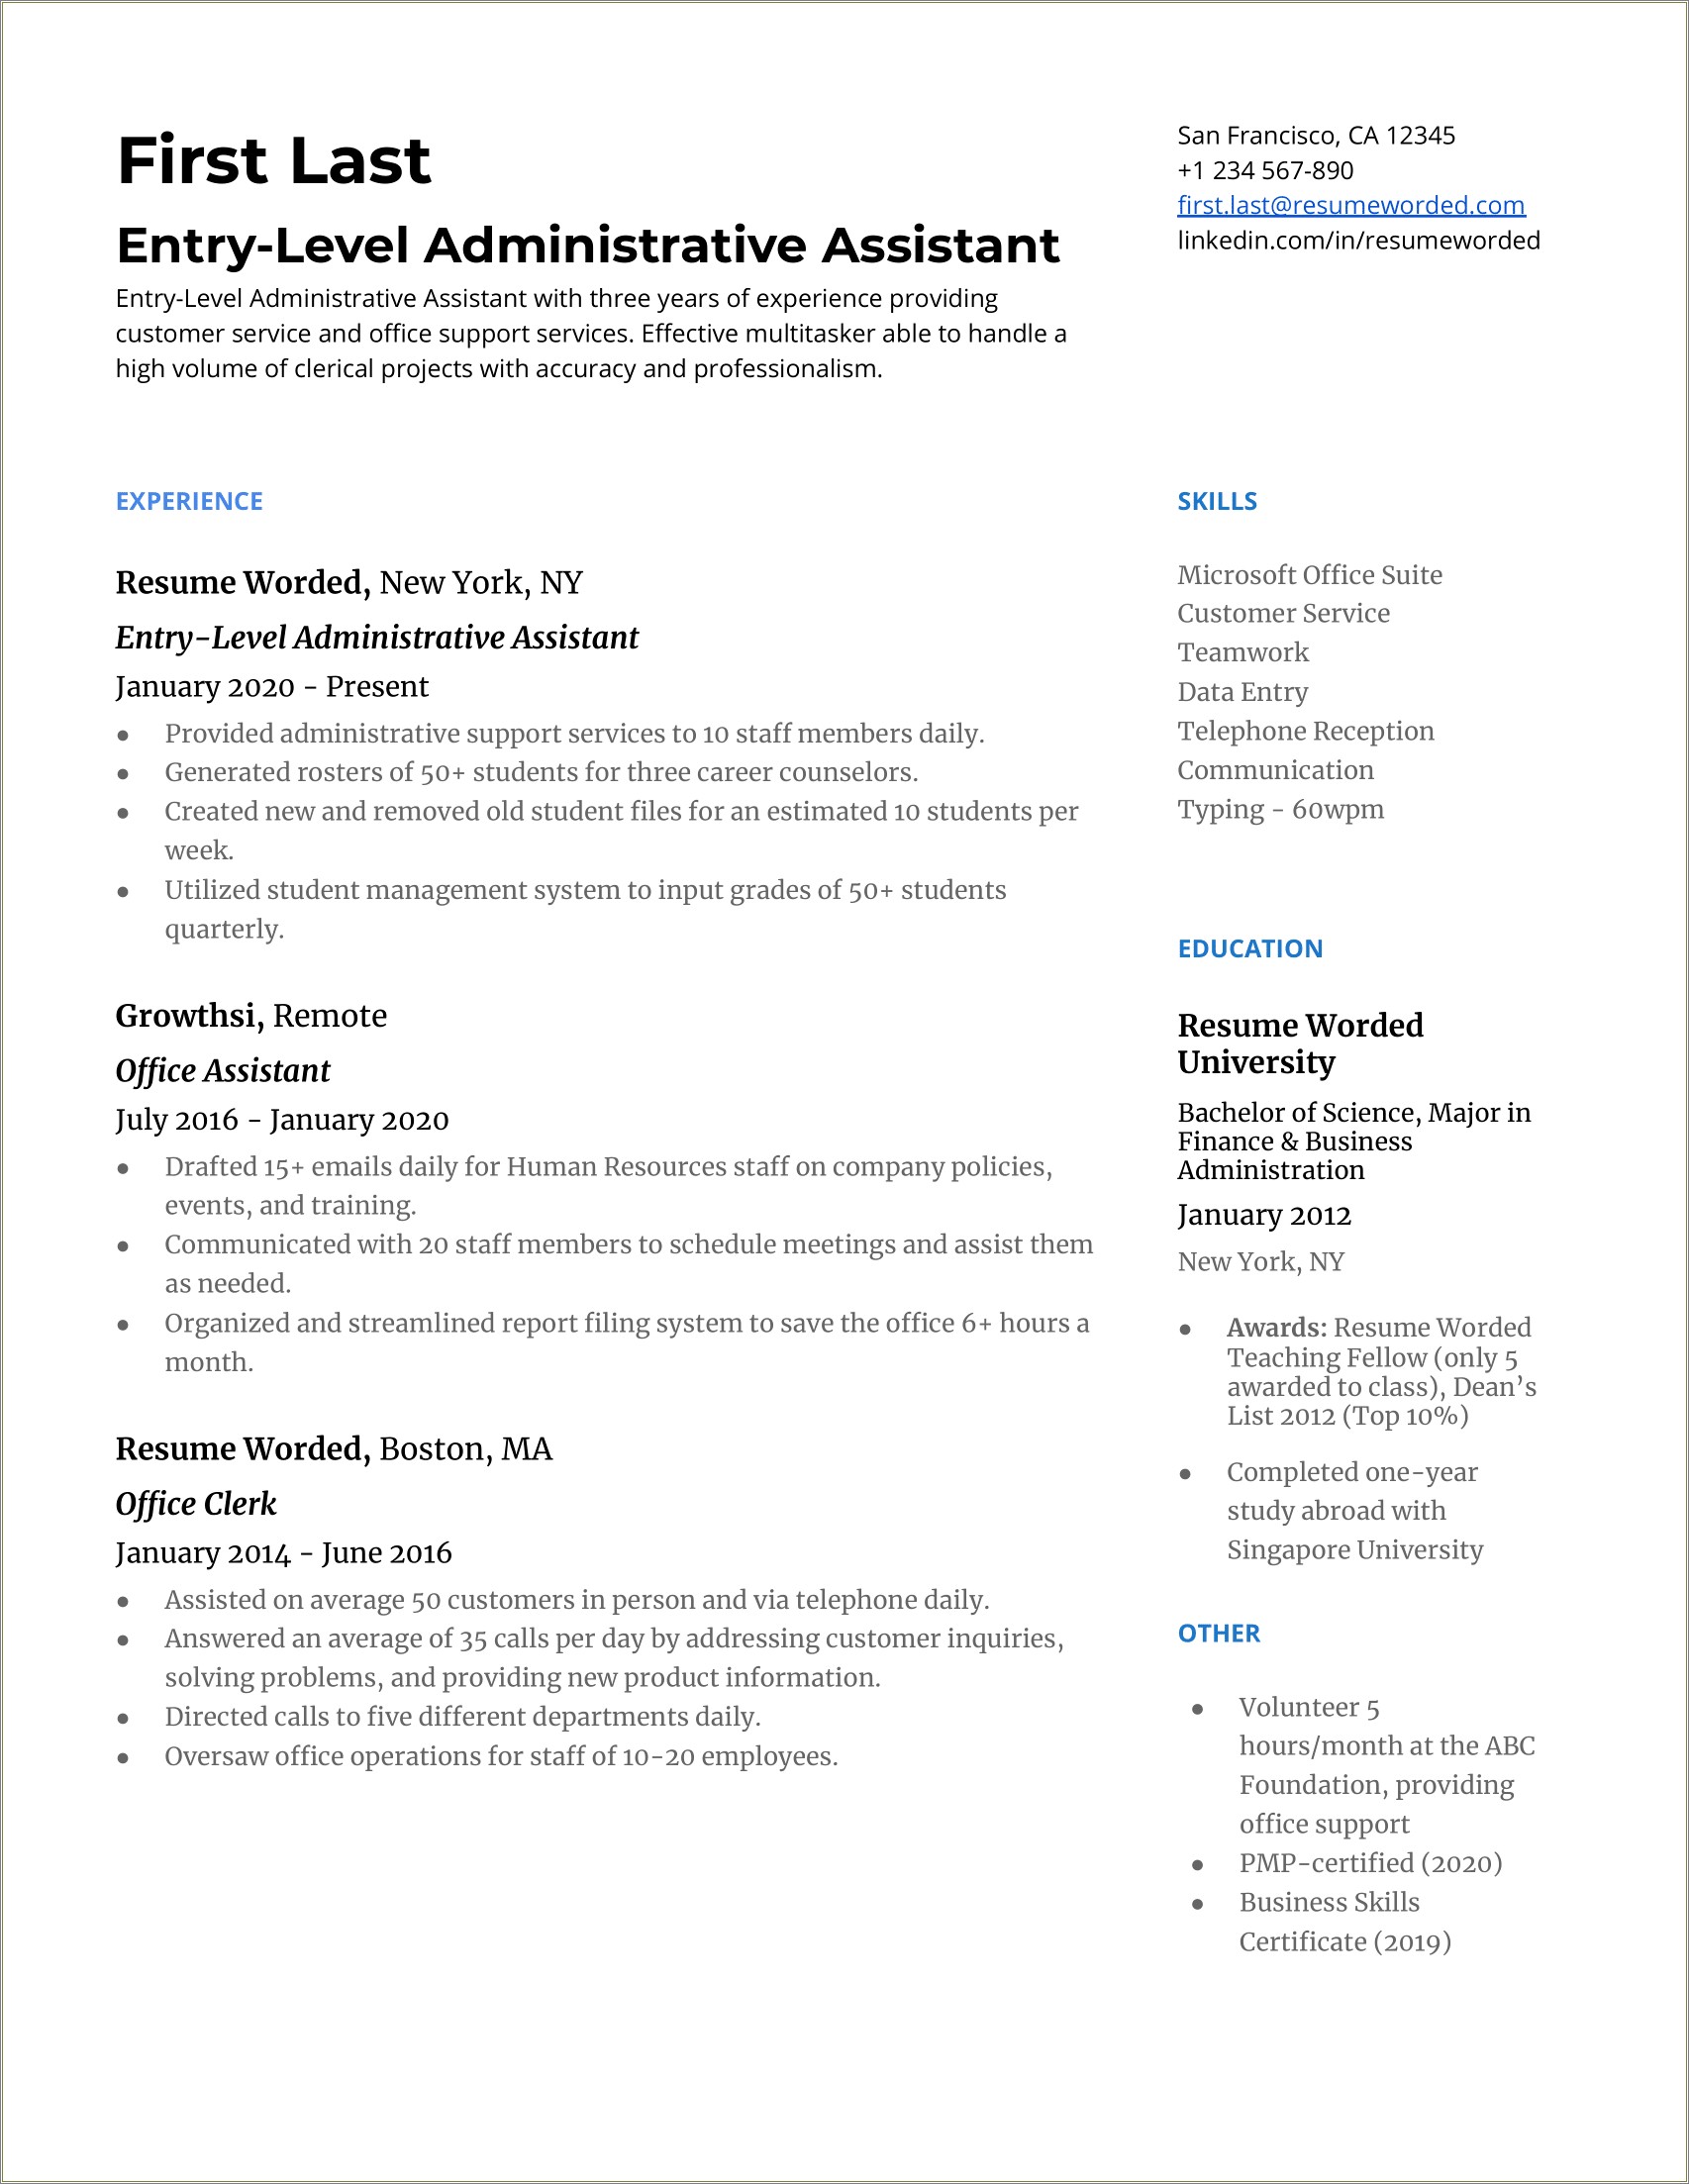 Sample Resume Administrative Support Specialist